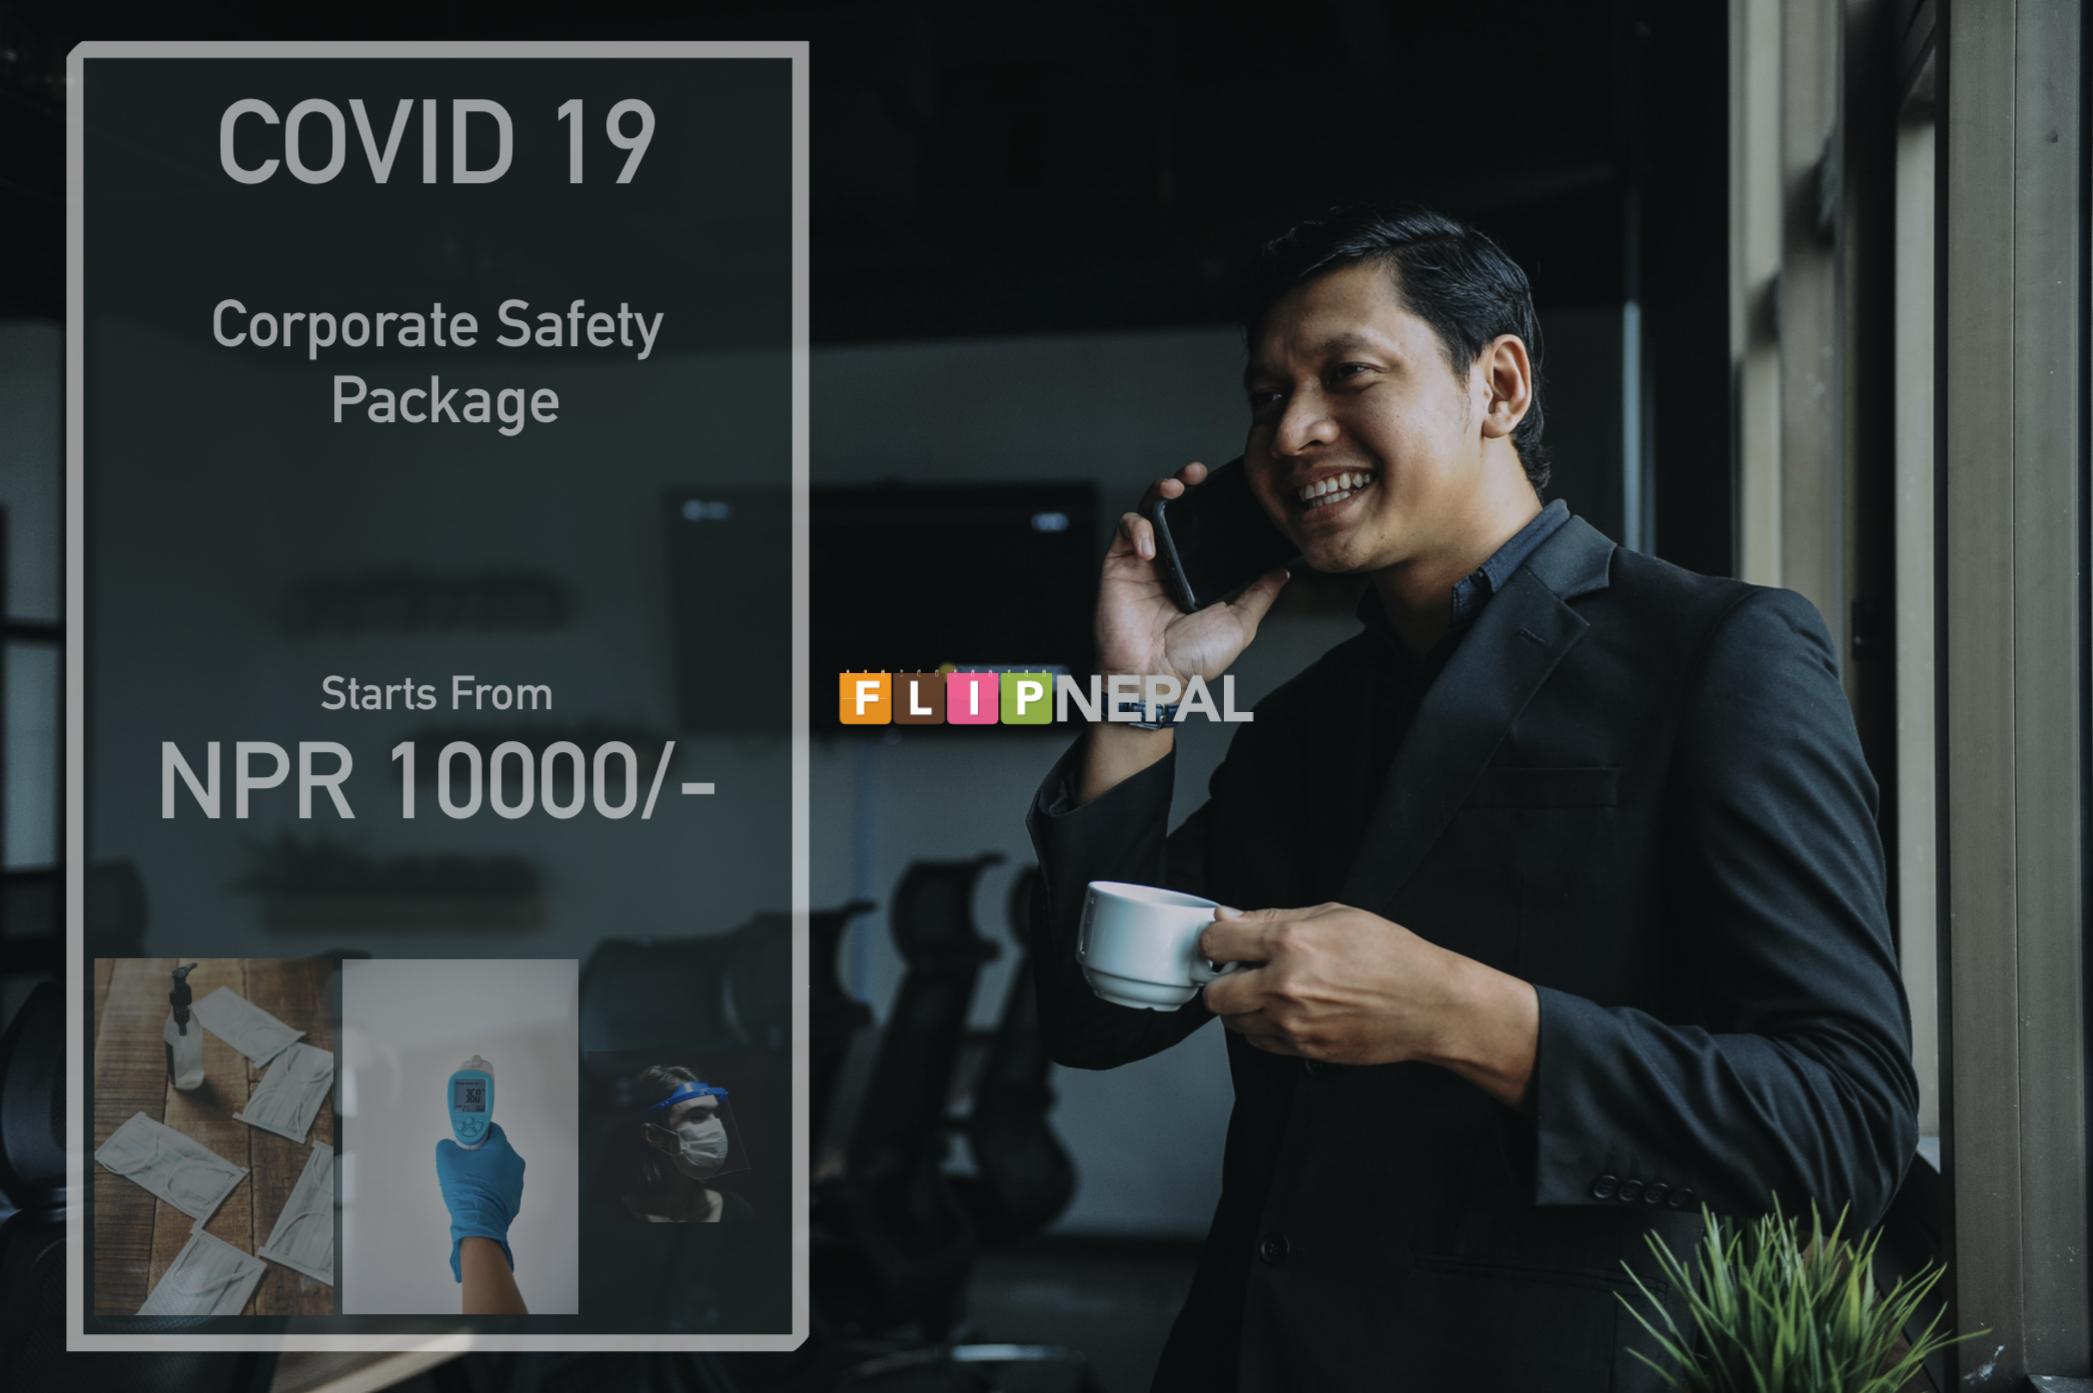 COVID 19 Corporate Safety Package